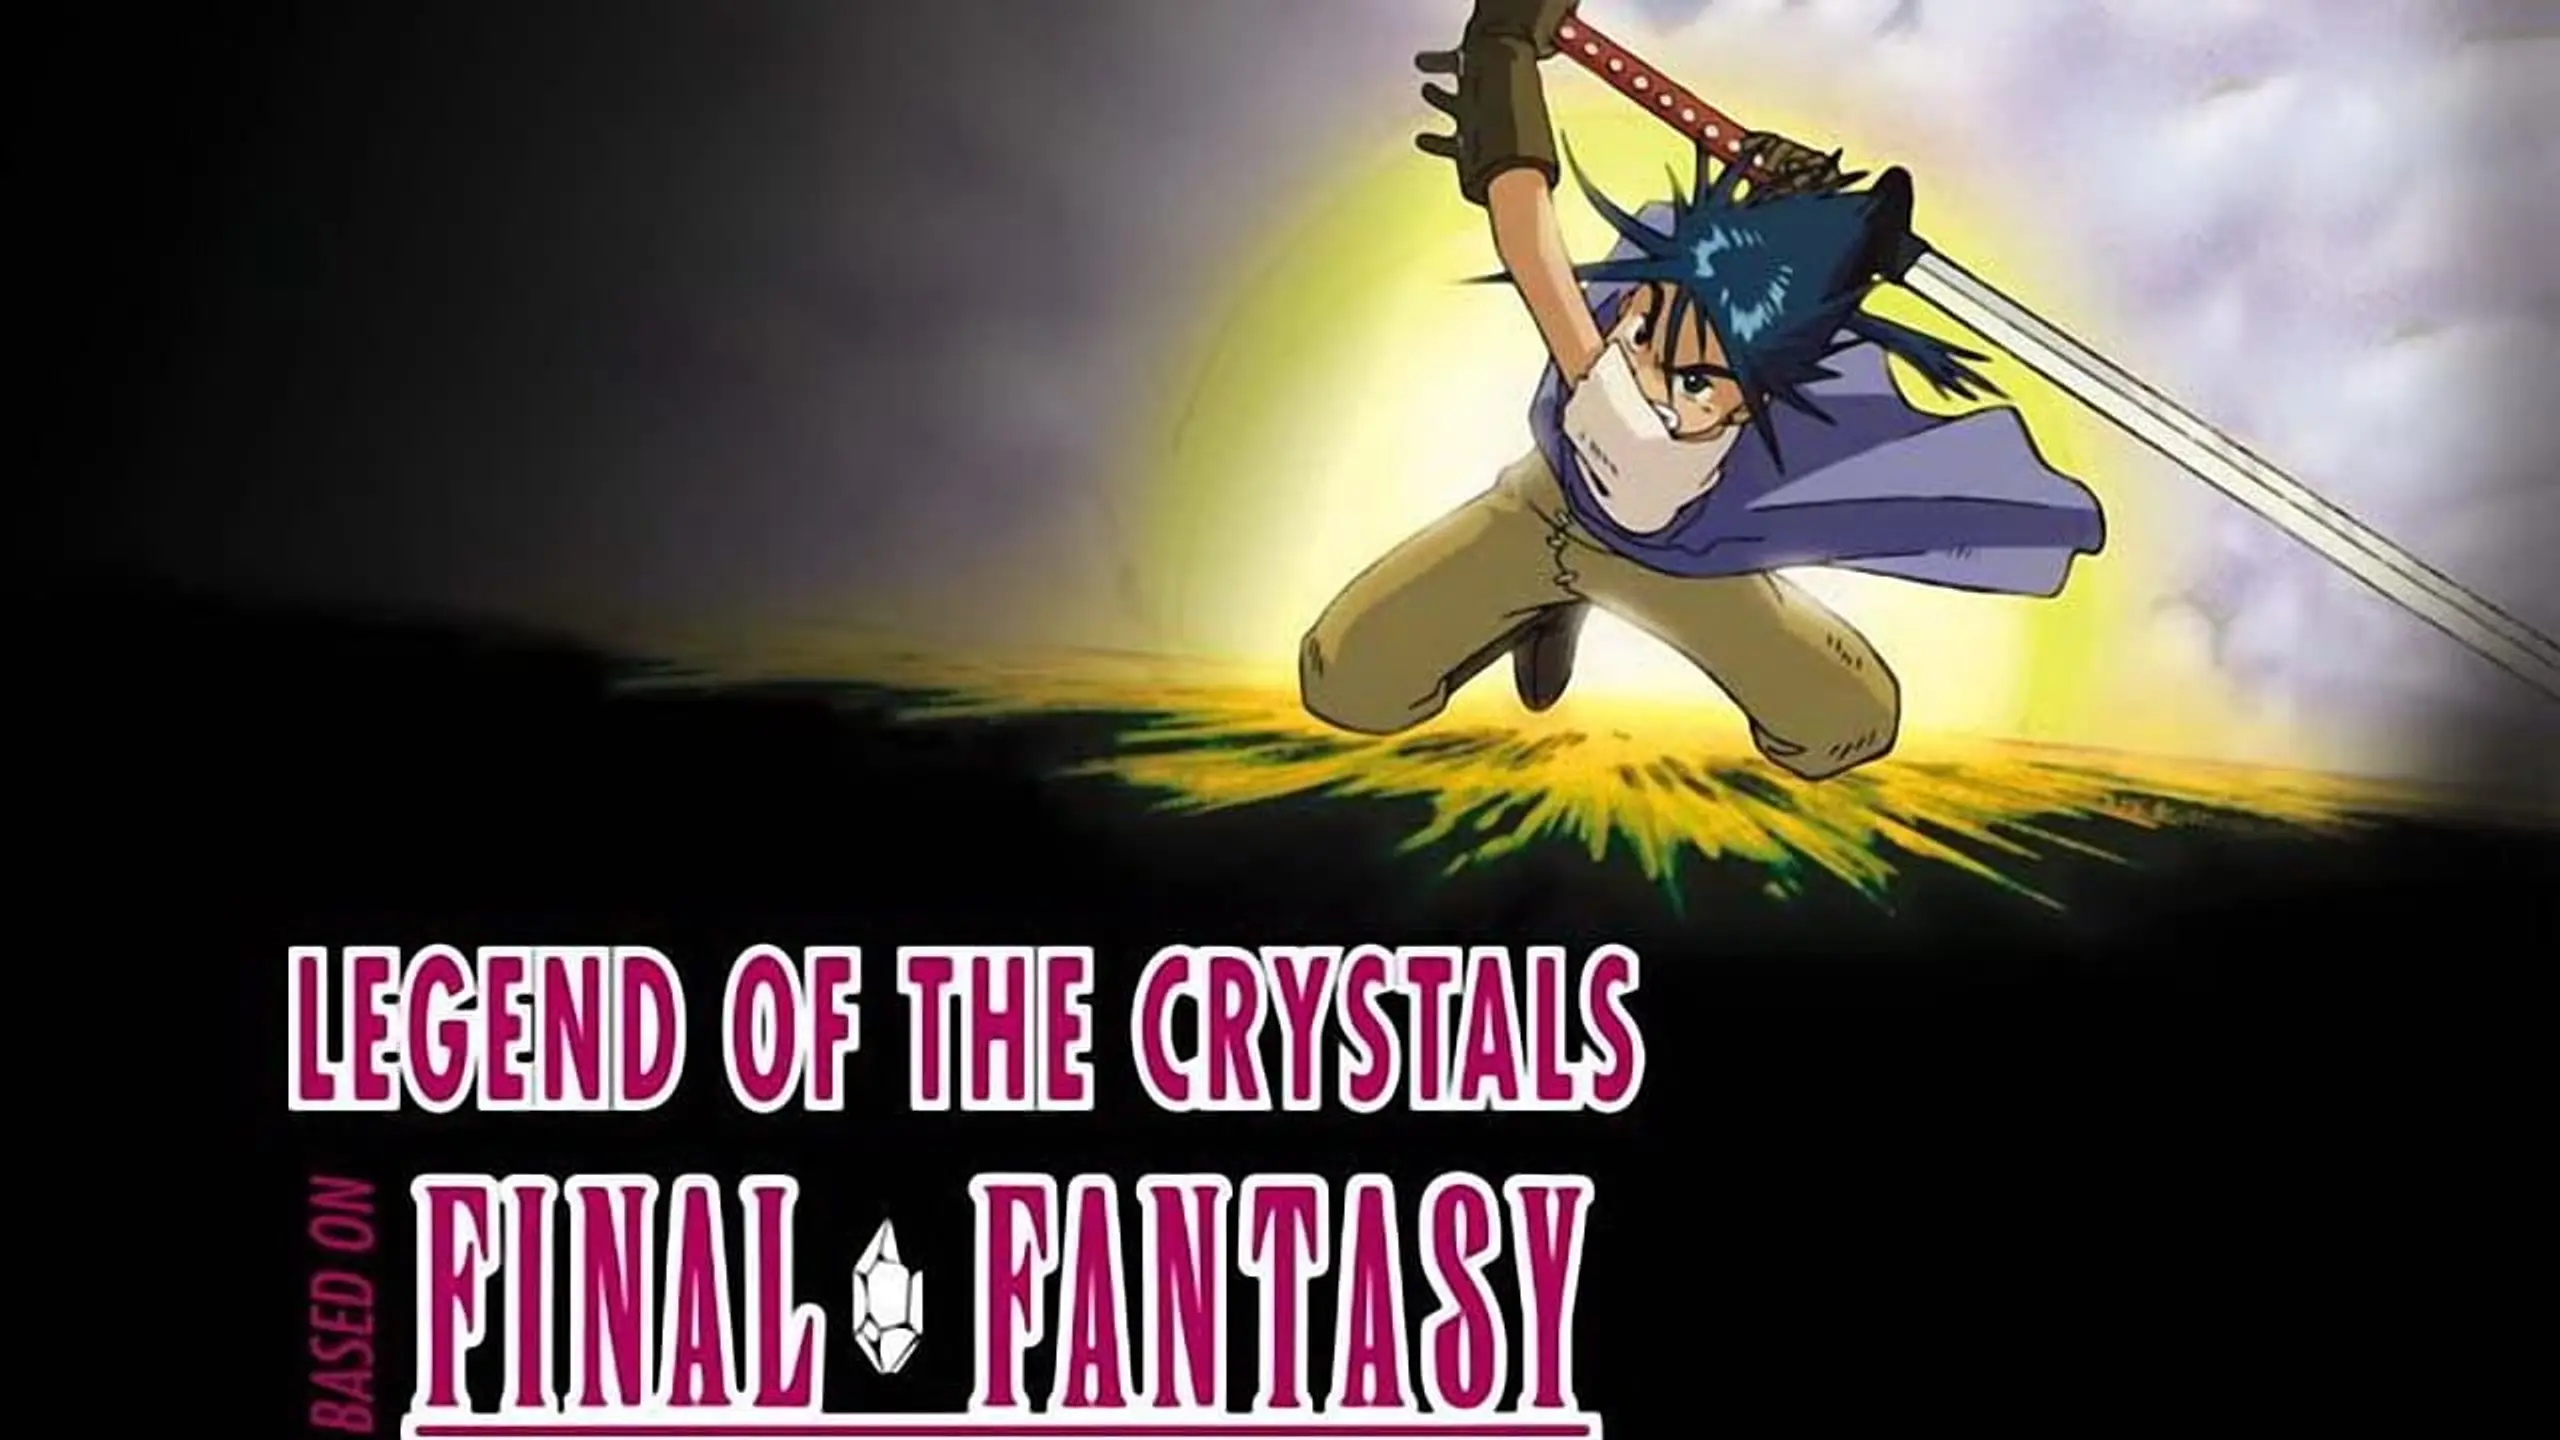 Final Fantasy - Legend of the Crystals